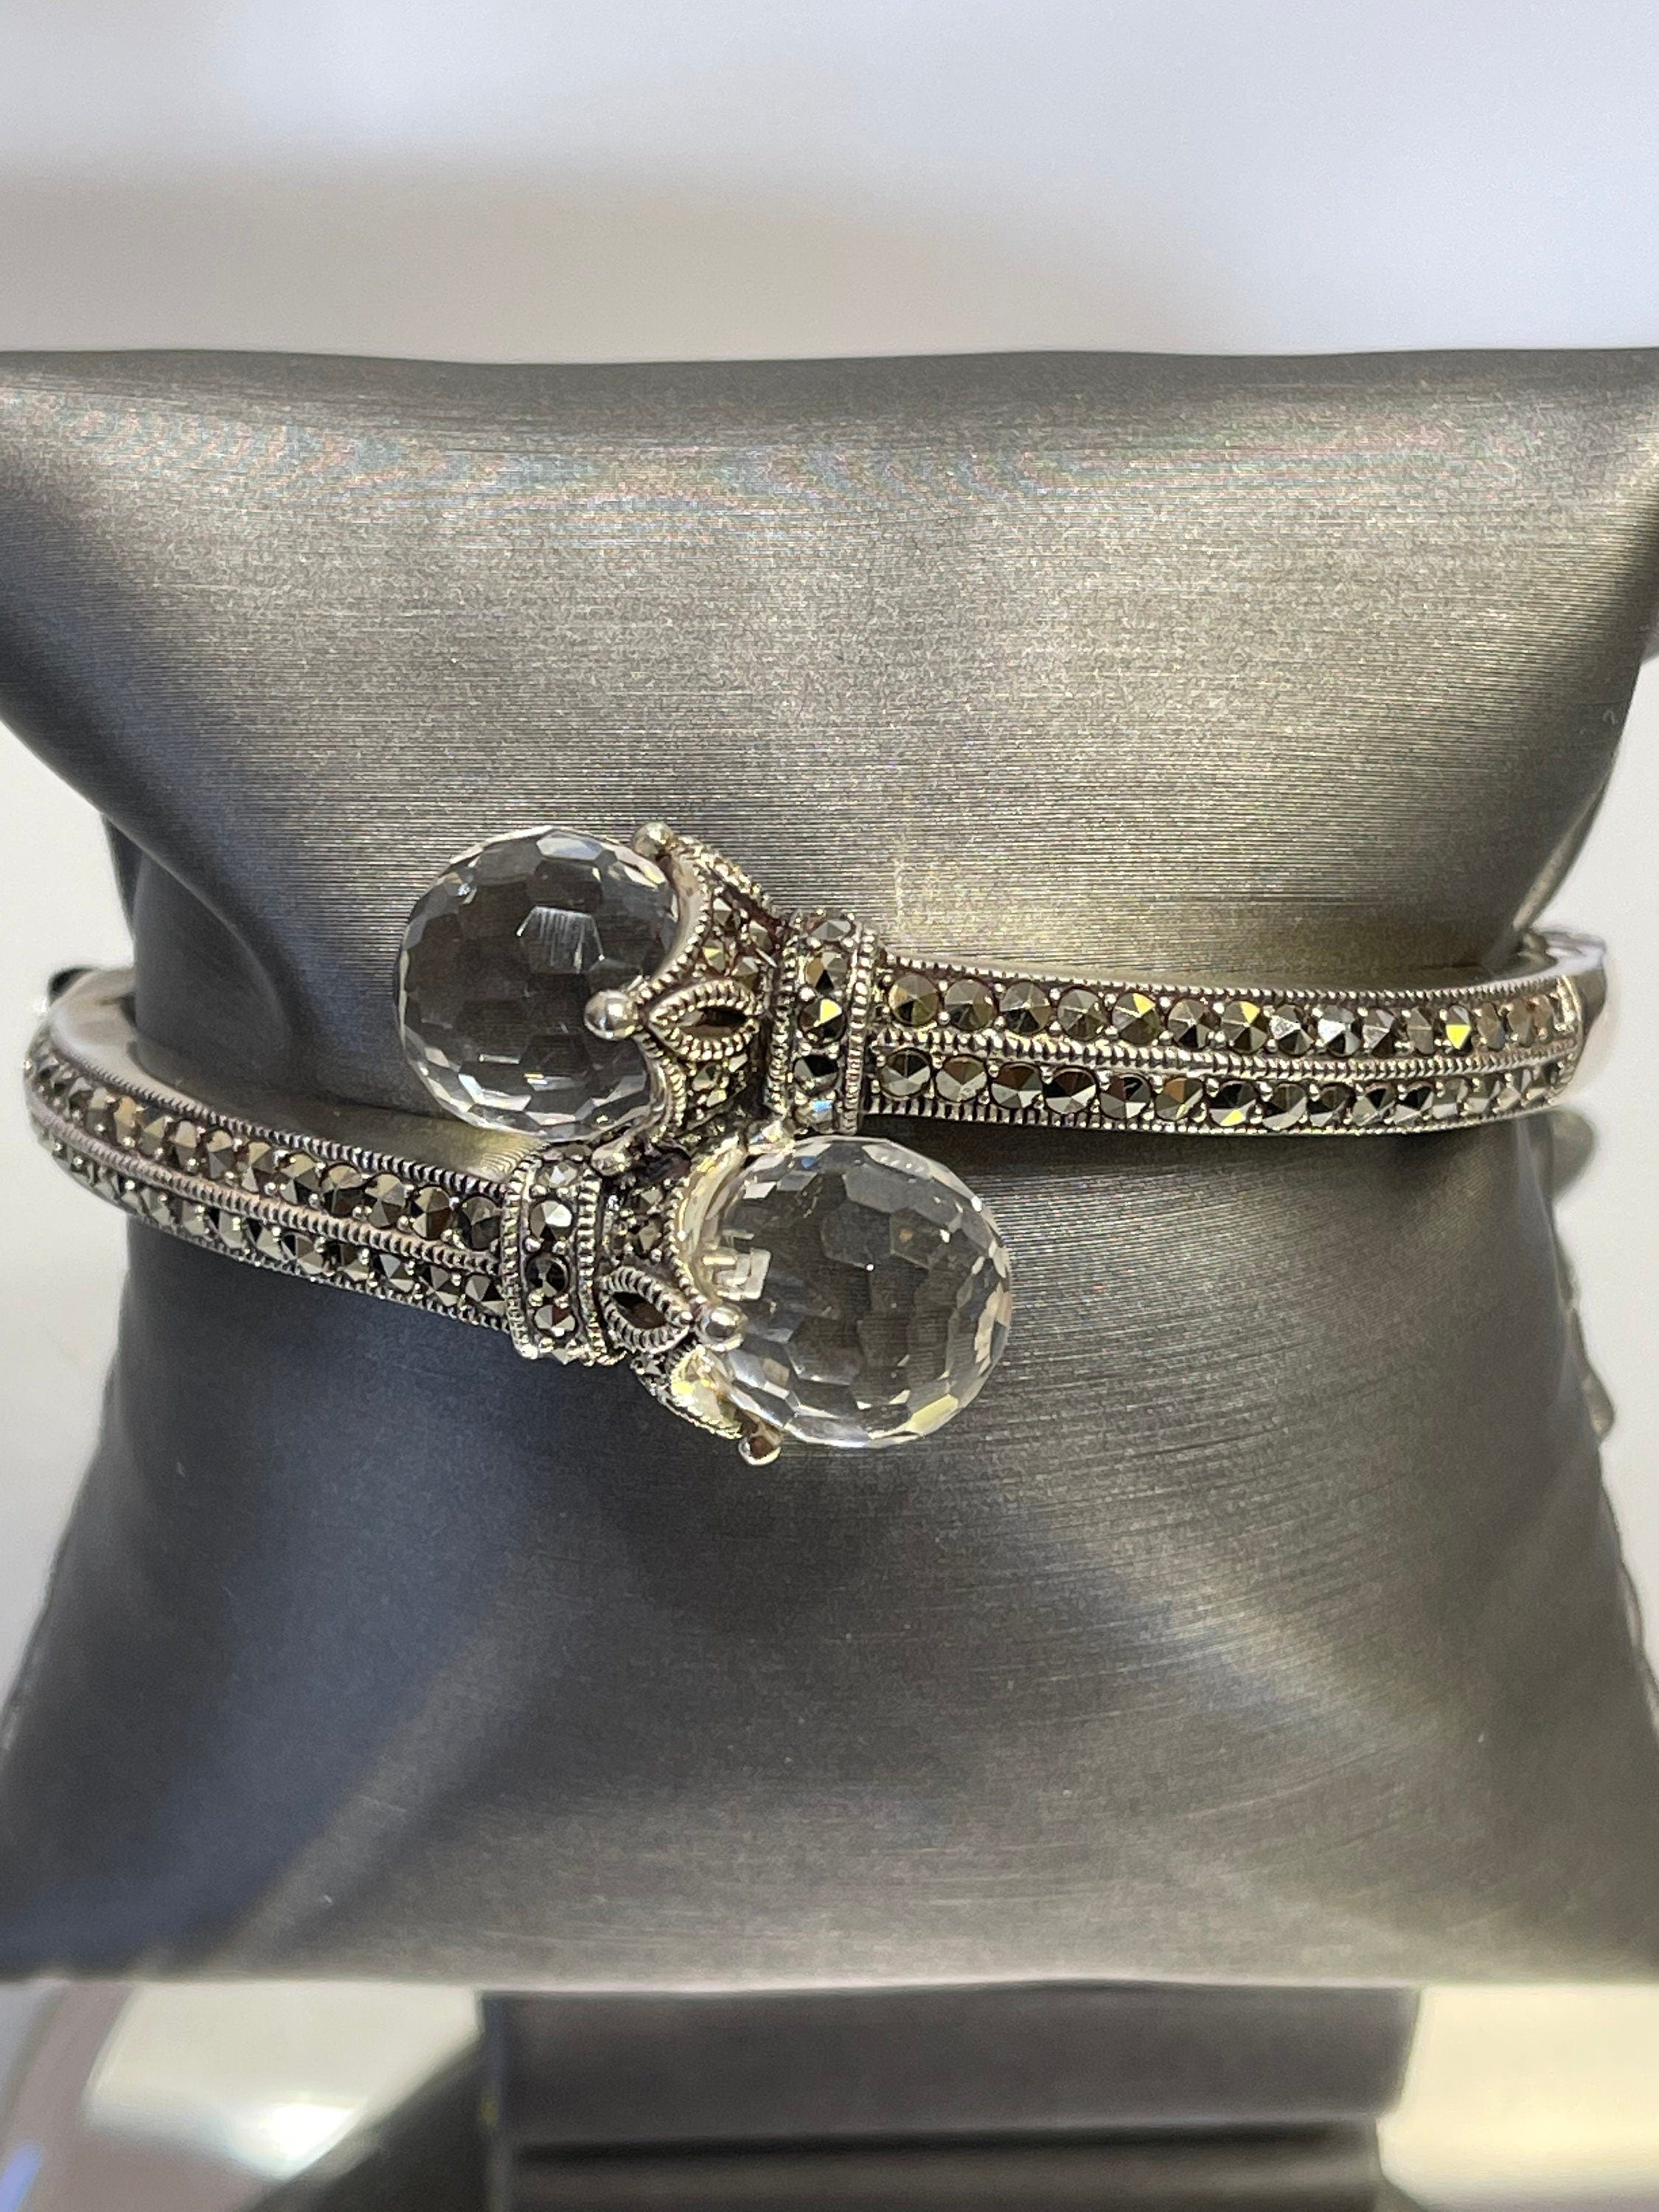 Diamond Ball and Hook Bangle Bracelet in Sterling Silver and